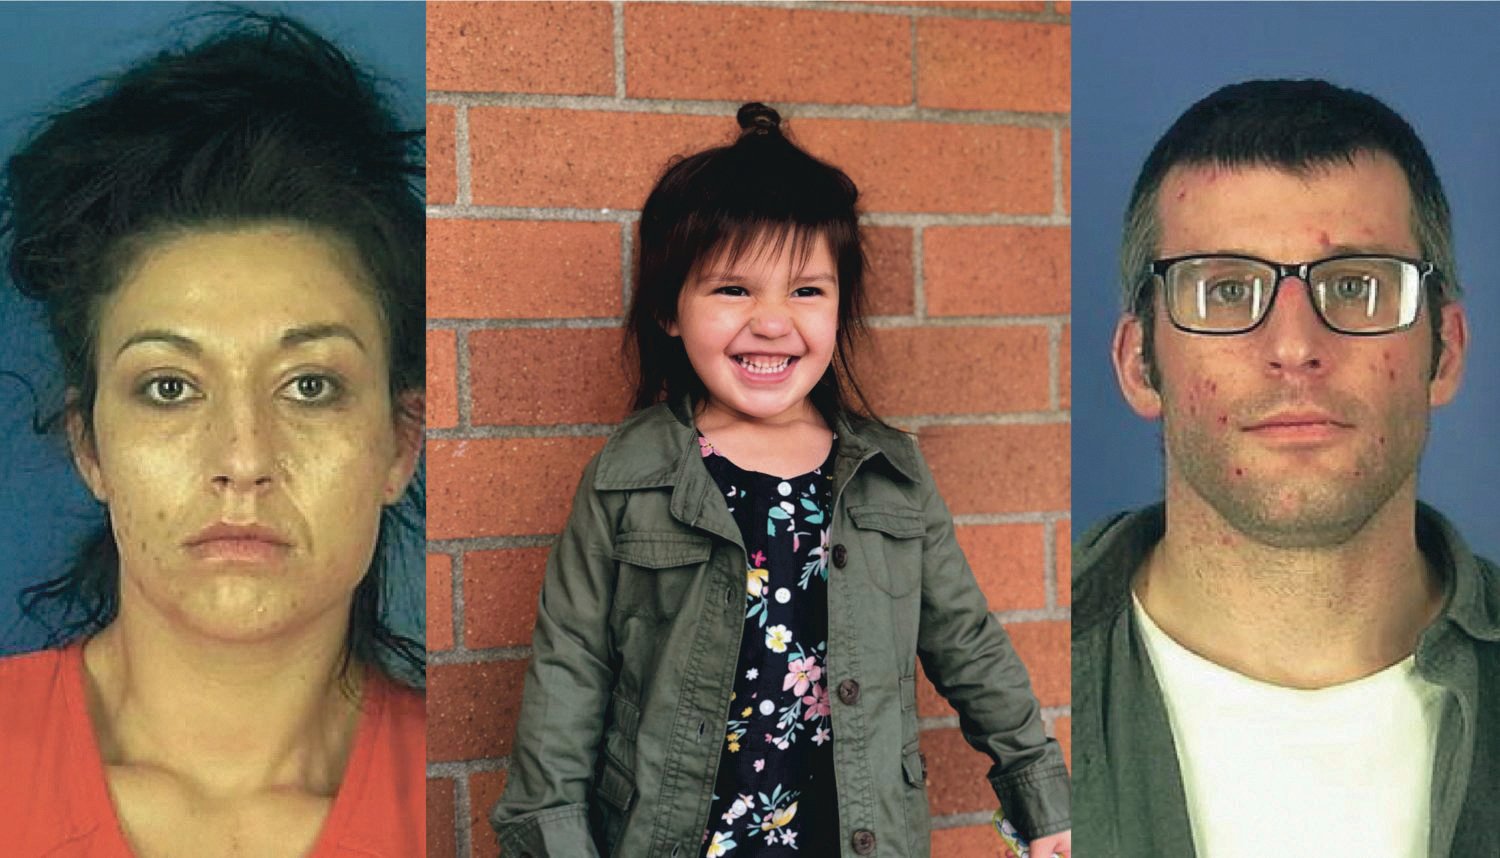 Jordan Bowers, left, and Andrew Carlson, right, are suspects in the disappearance of their daughter Oakley Carlson, center.